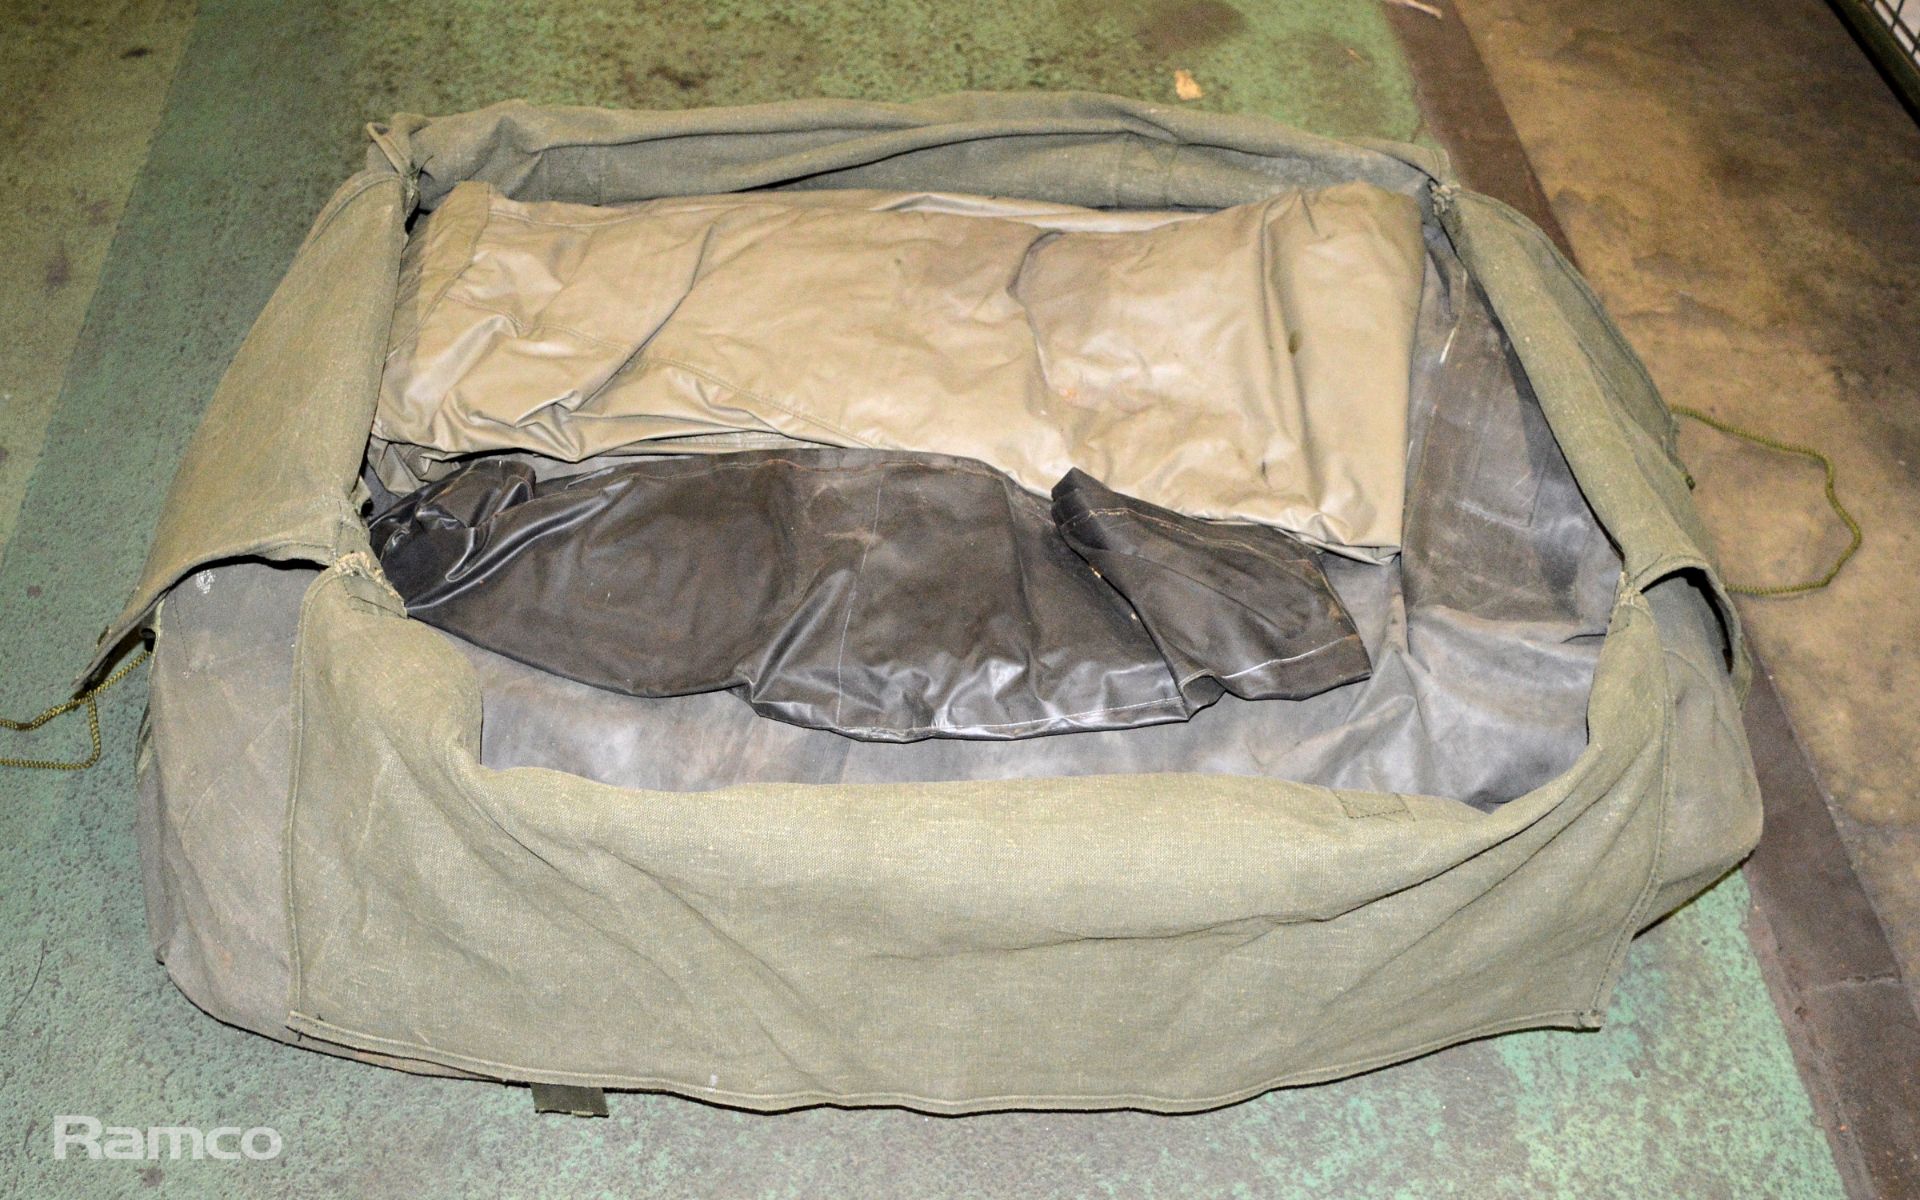 Valise Collapsible Water Tank in Carry Bag - 2500 Gallon Capacity - Image 3 of 7